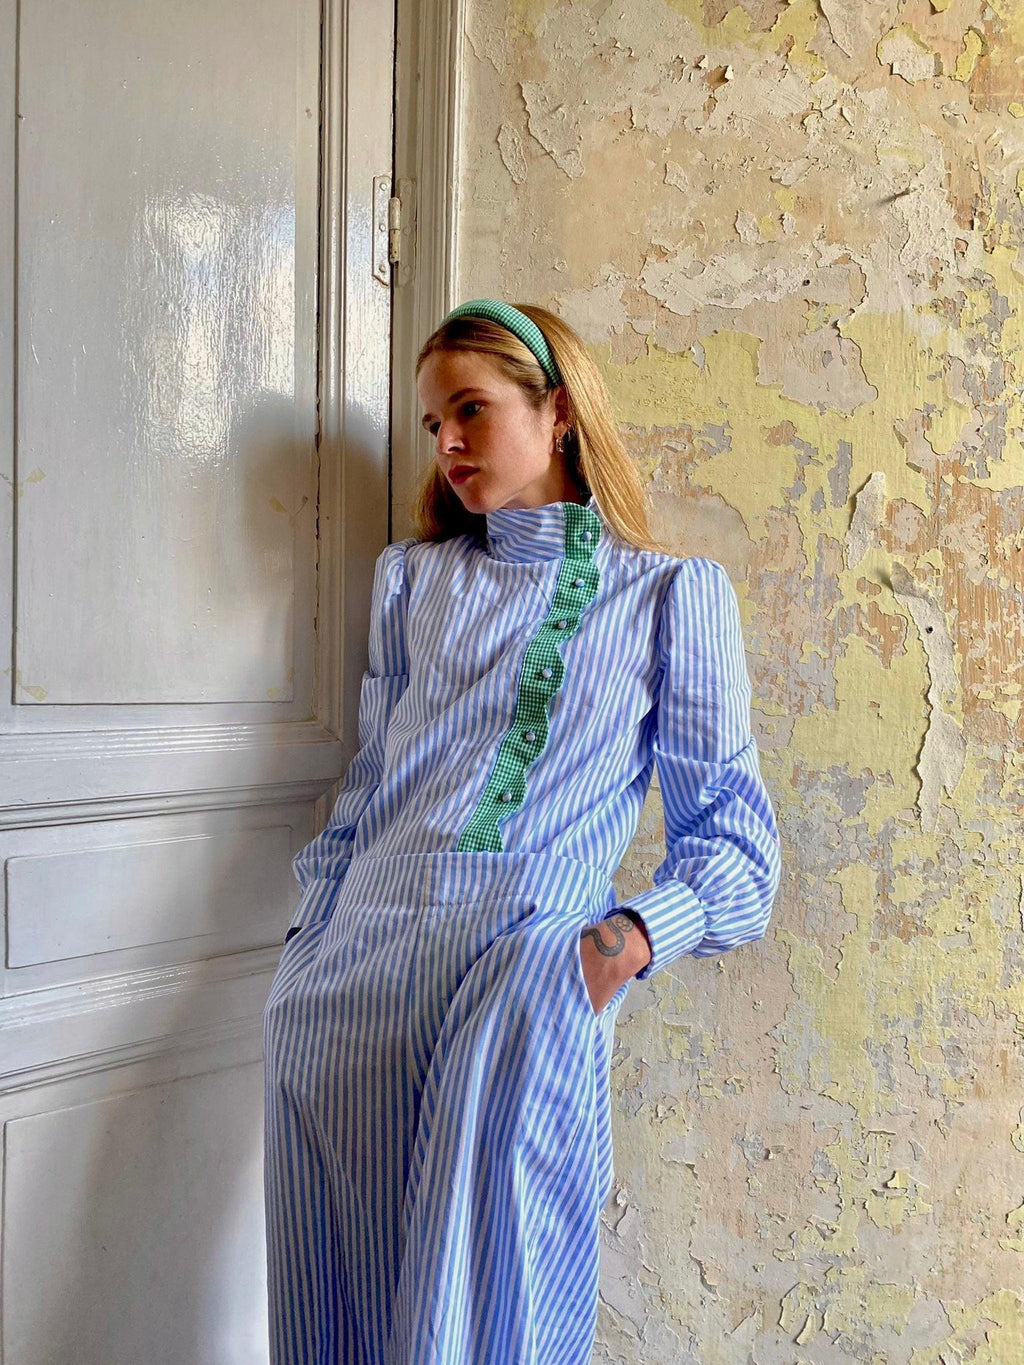 Raviolo shirt with scalloped edges - blue stripes - Gingham Palace